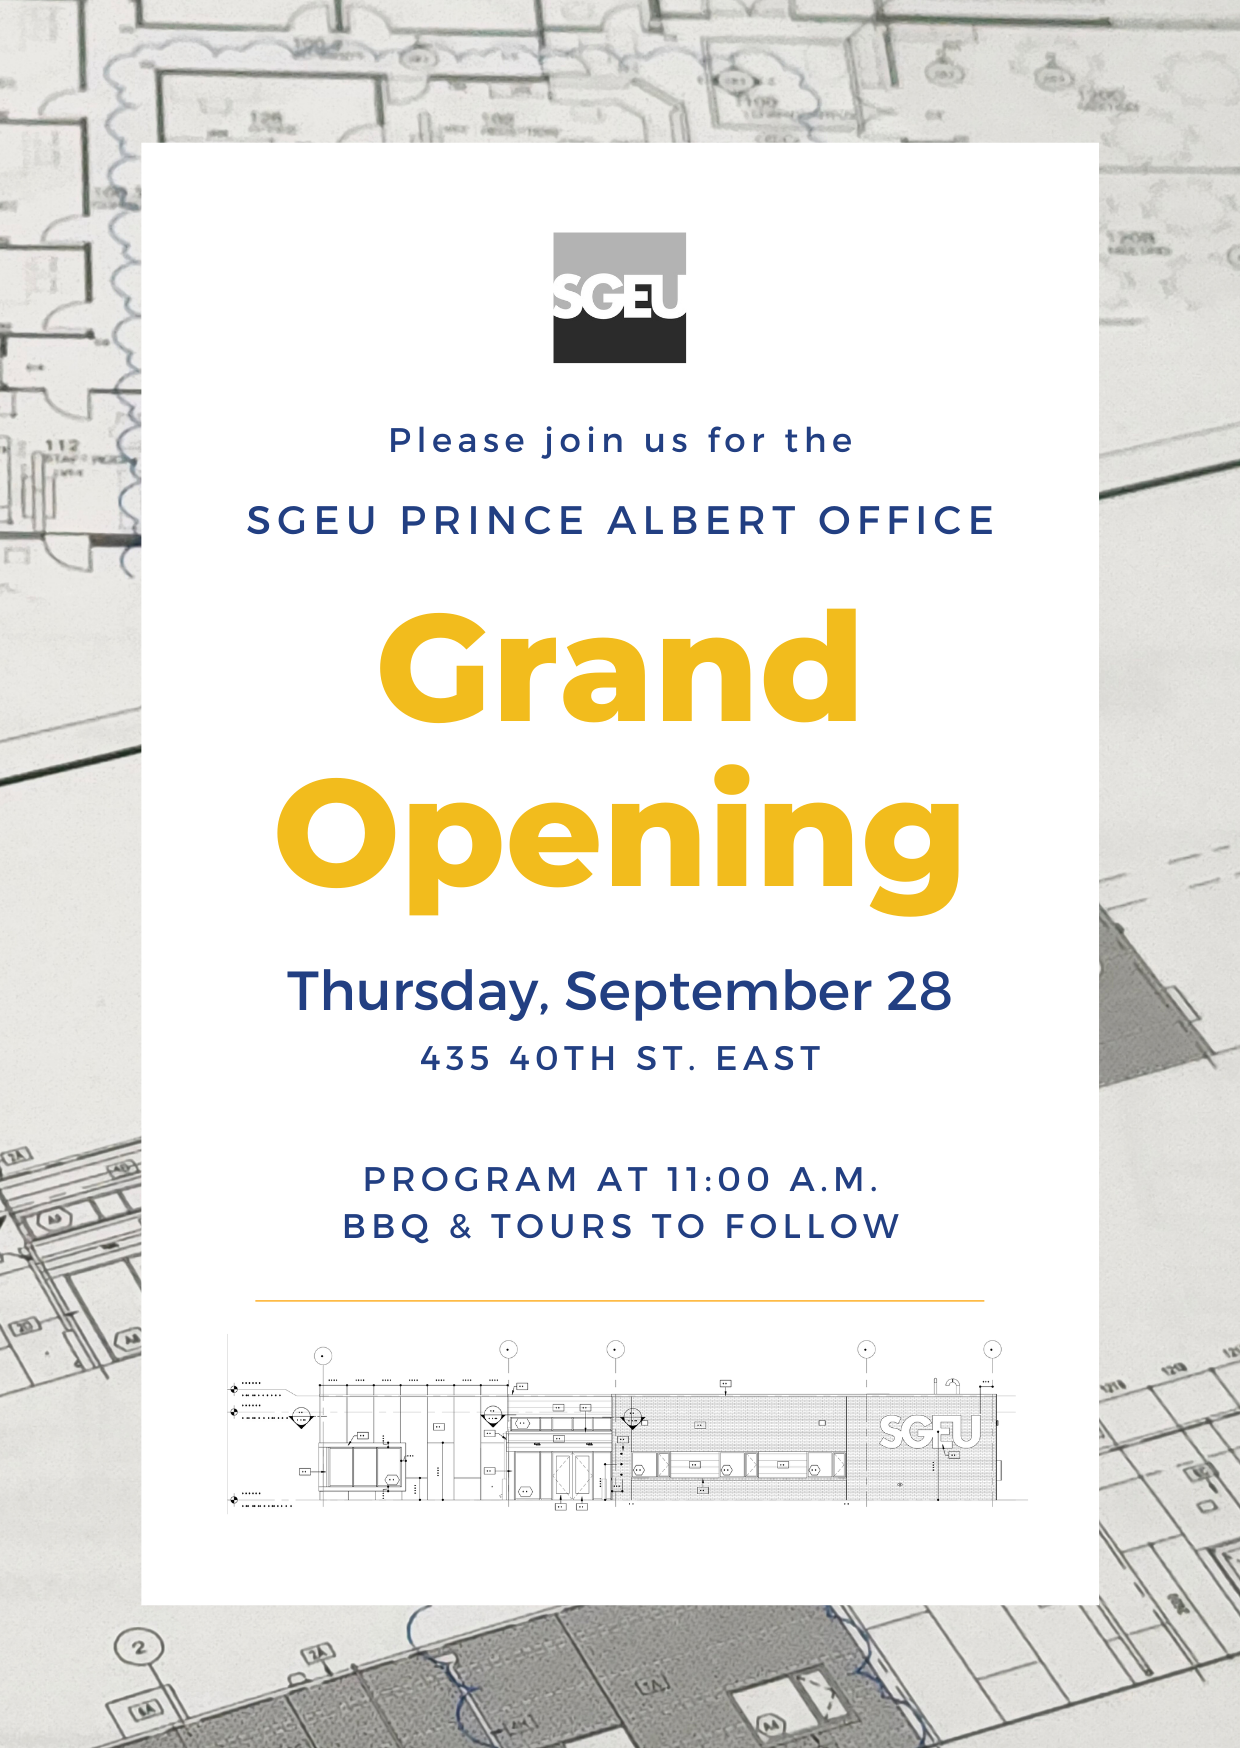 Invitation to Prince Albert office grand opening